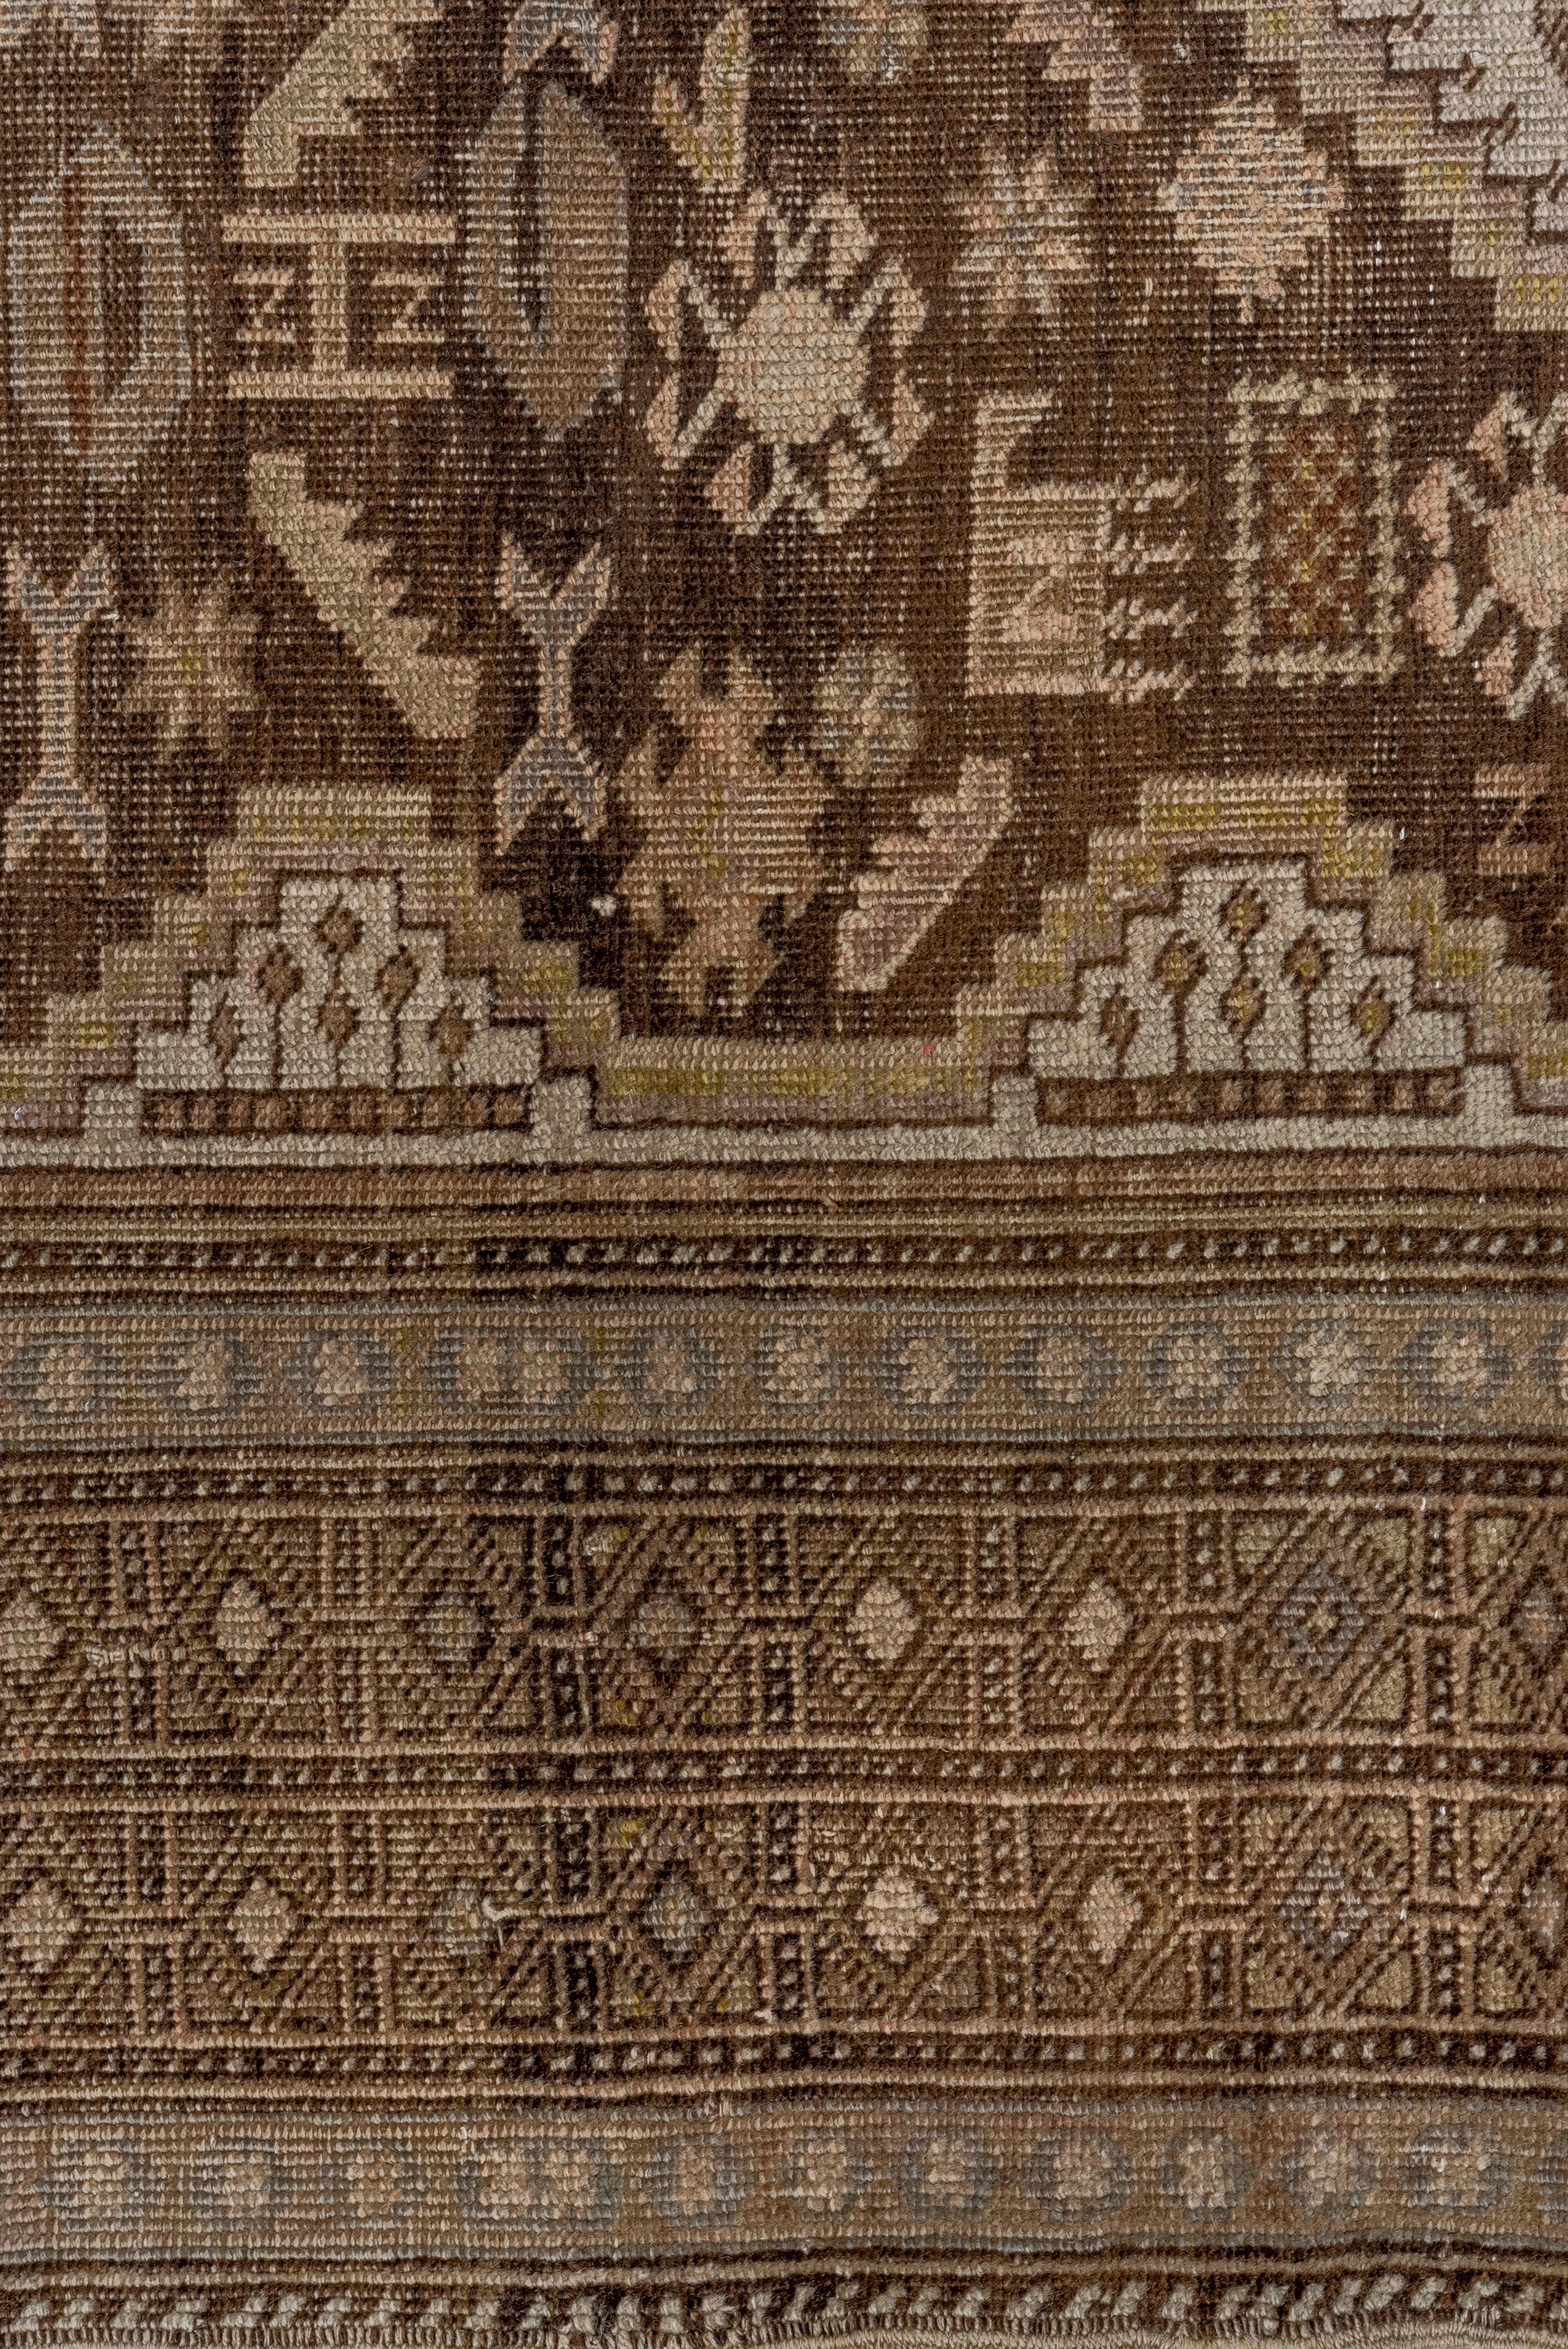 Wool Caucasian Tribal Rug in Olives and Browns For Sale